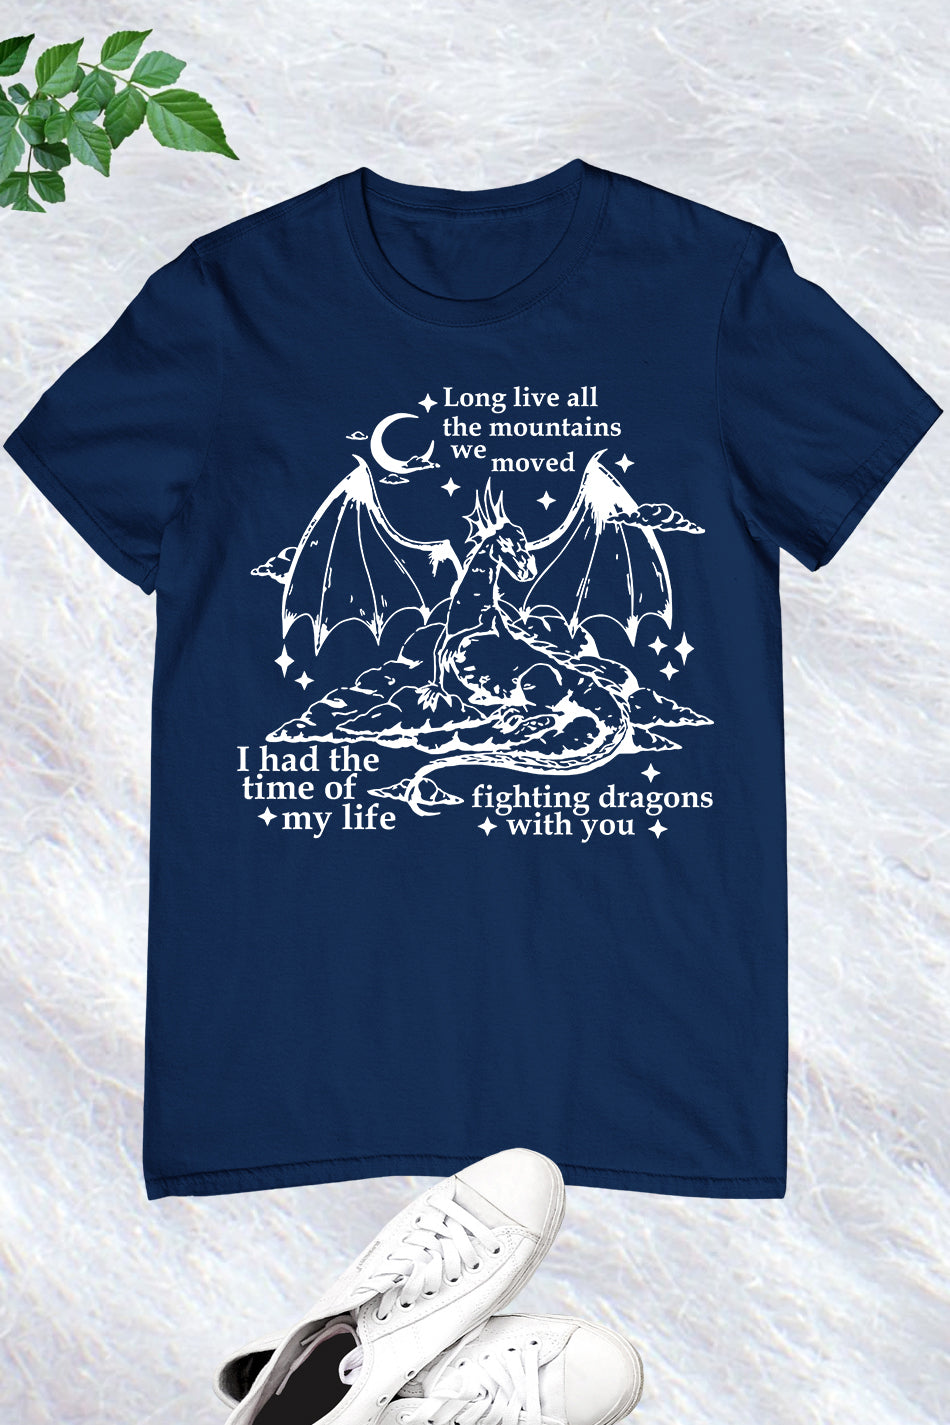 Travel back in time with our 'Retro Fighting Dragons With You' Speak Now TV Inspired Shirt. Relive the epic adventures and brave battles alongside Taylor Swift's iconic album. #SpeakNowInspired #DragonSlayerThrowback #EpicTVFashion